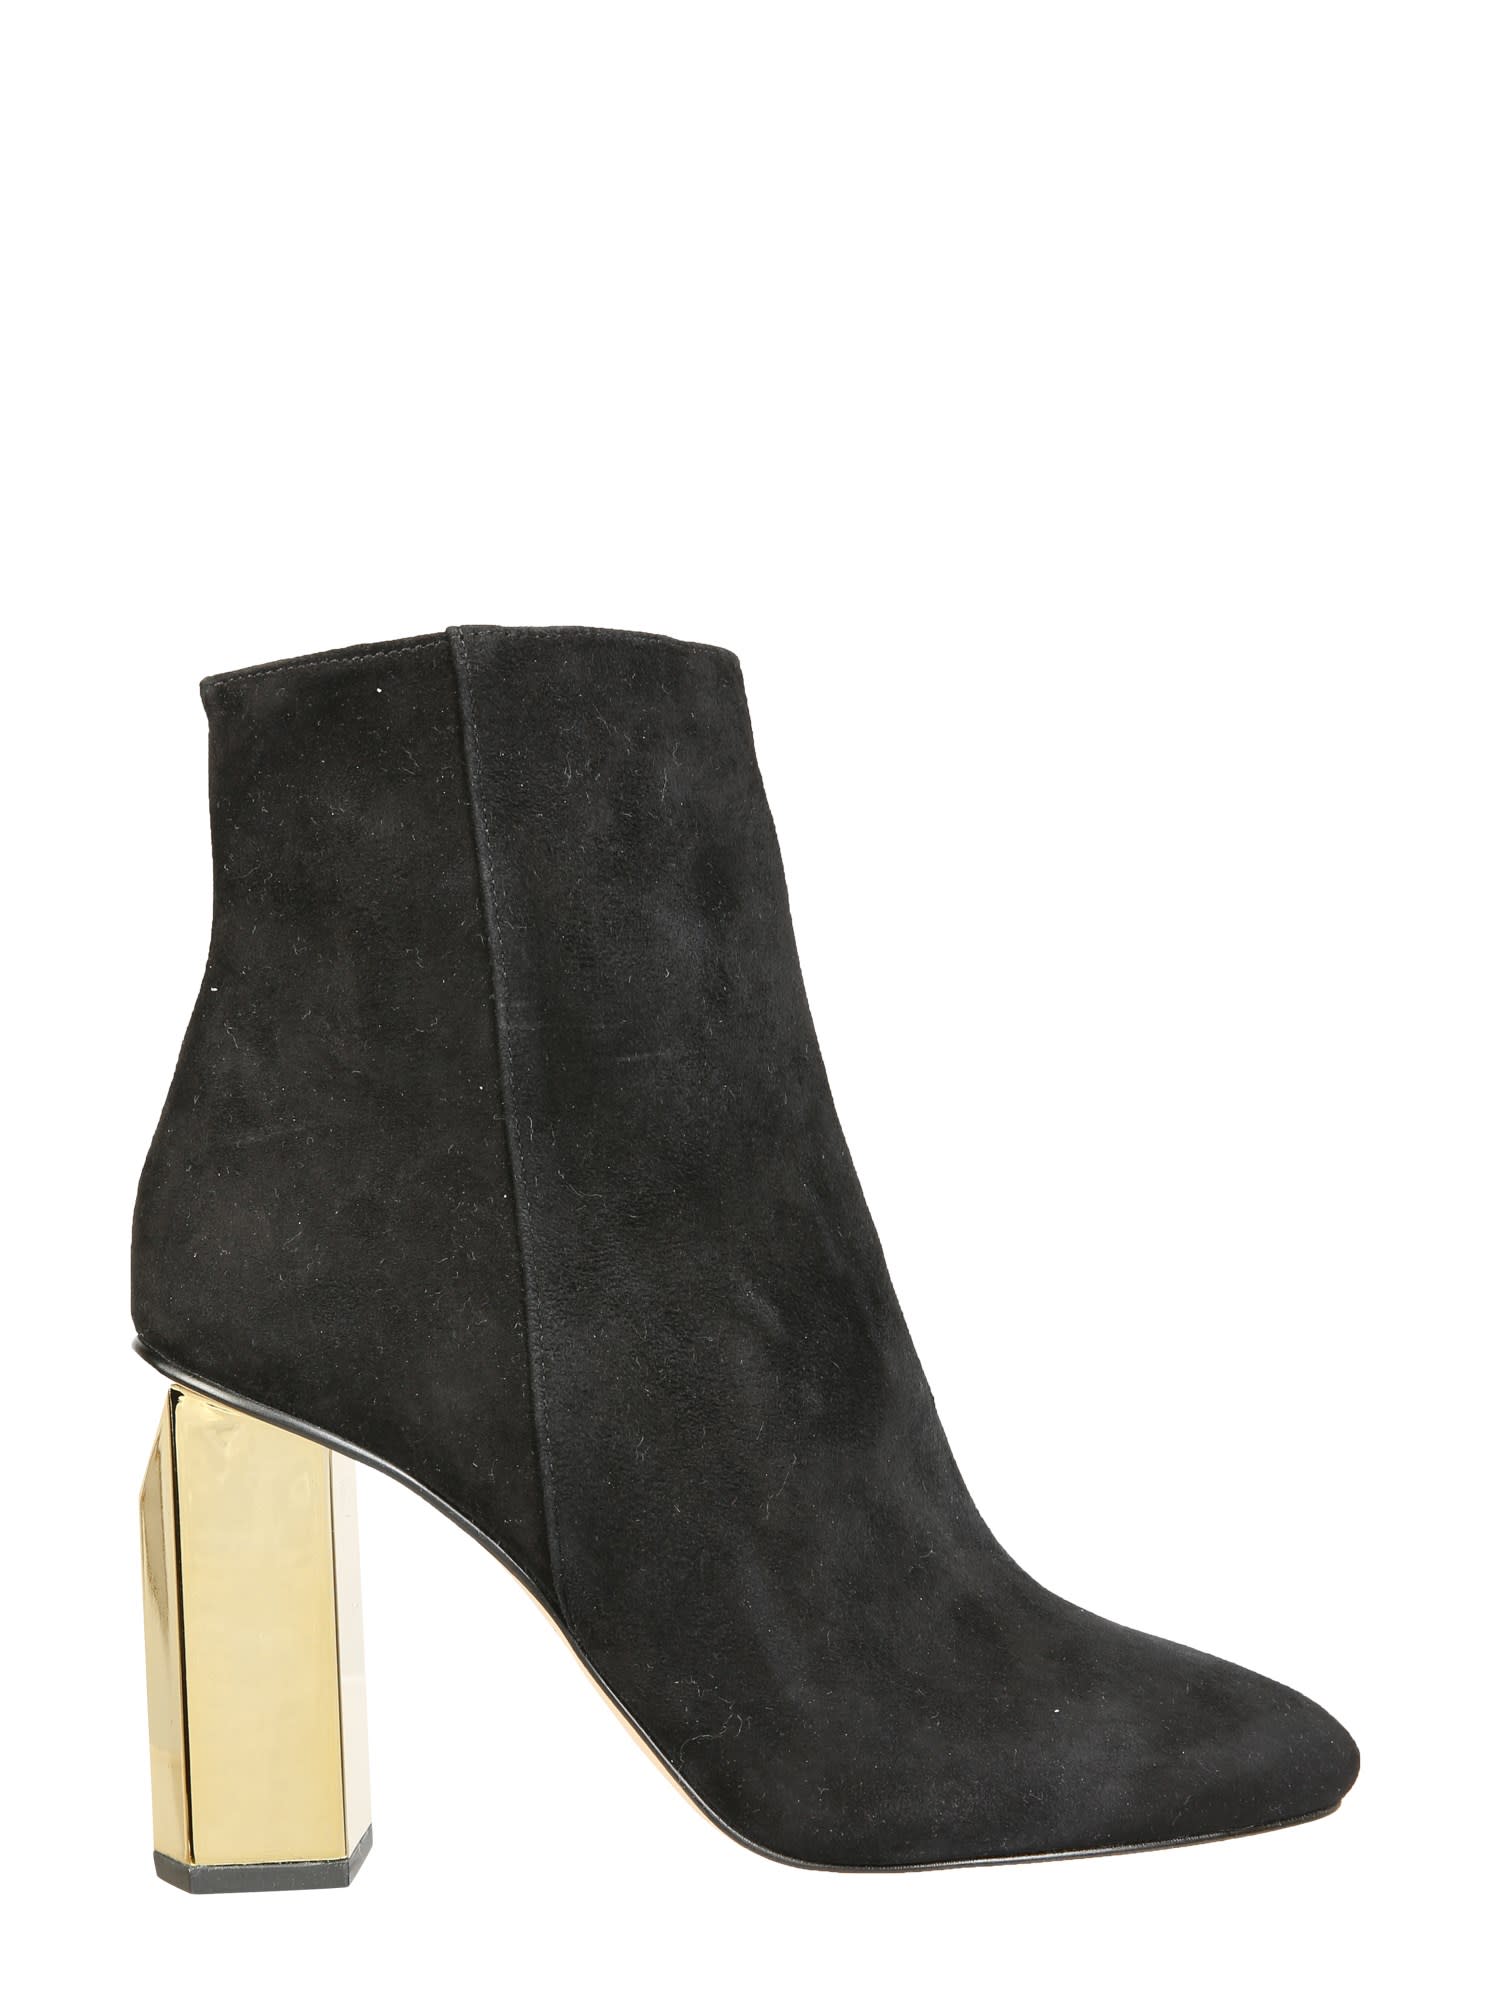 Buy Michael Kors Petra Boots online, shop Michael Kors shoes with free shipping